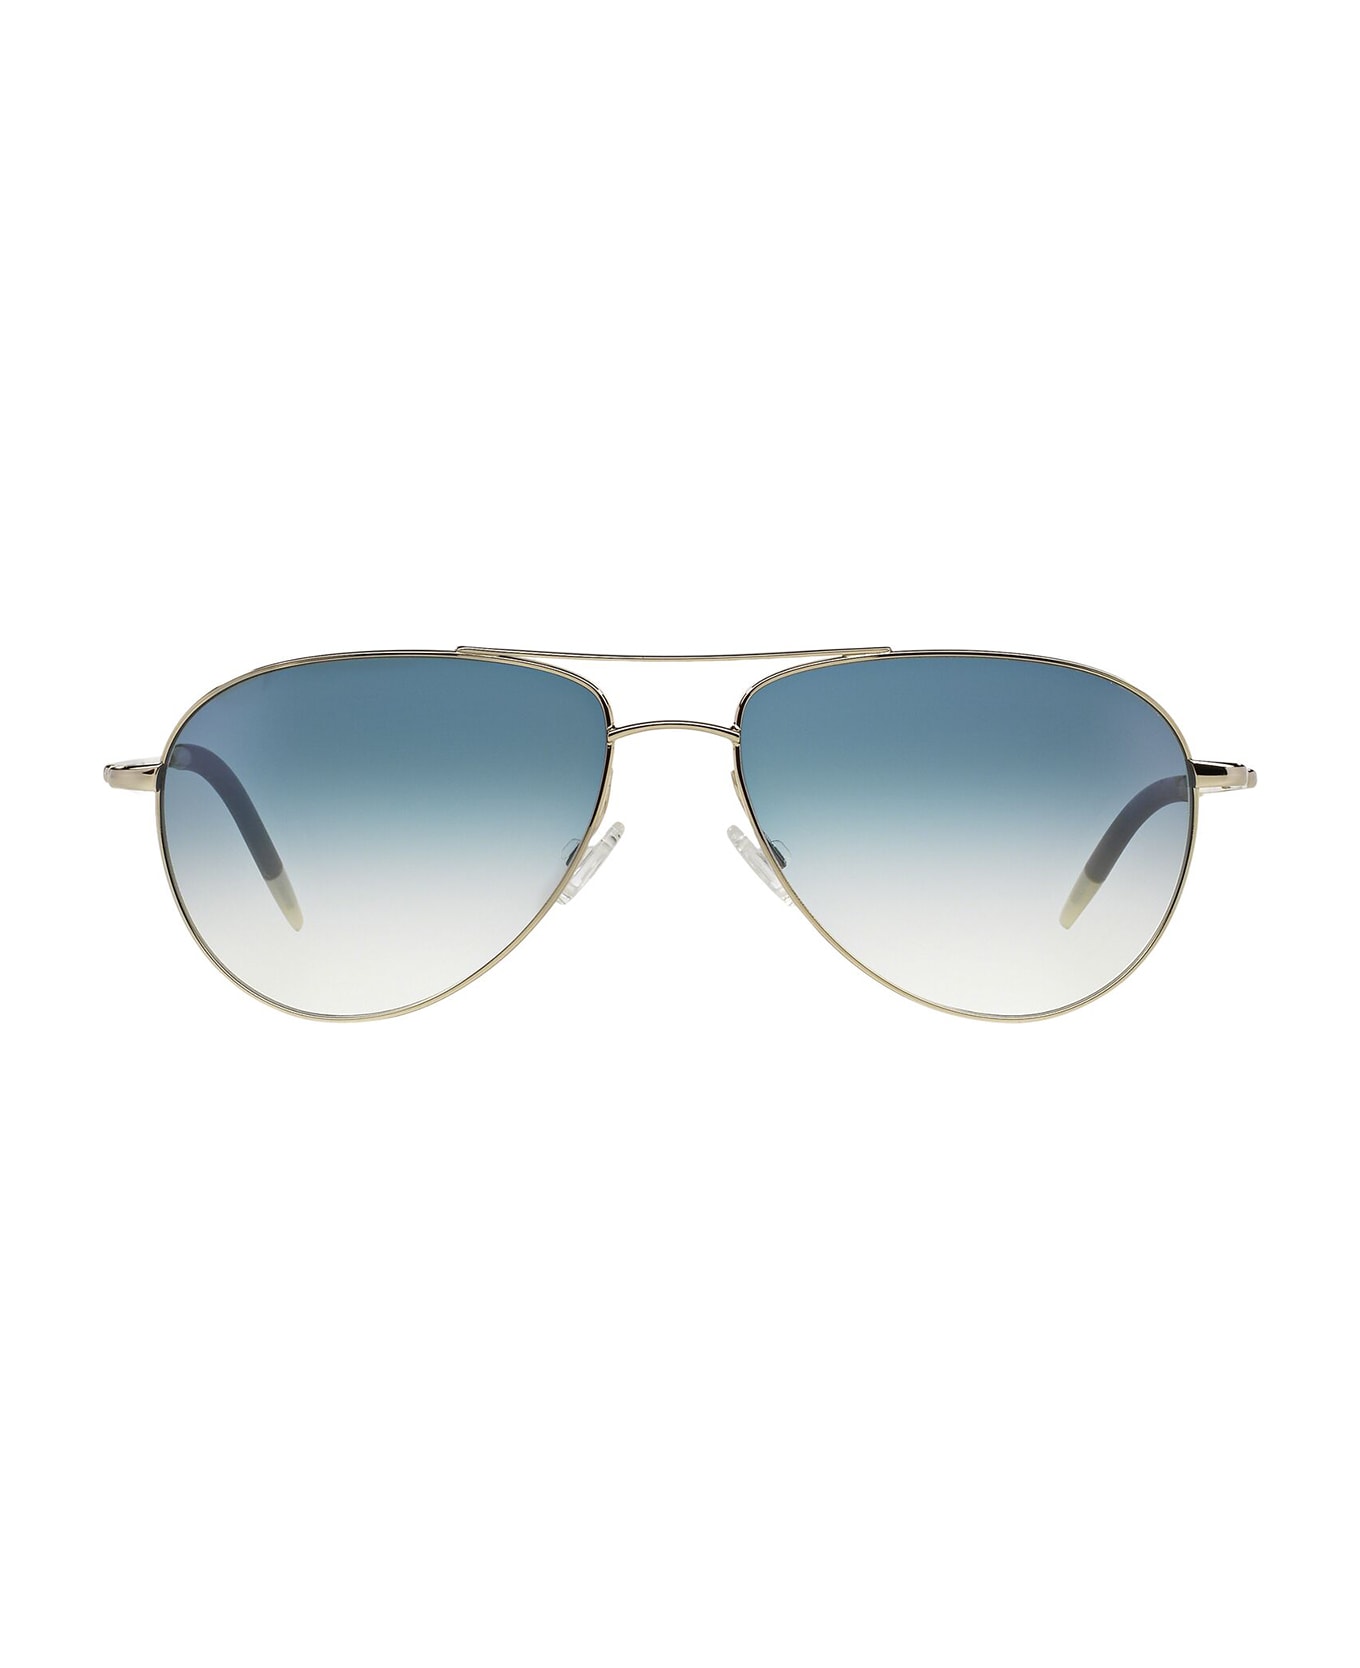 Oliver Peoples Ov1002s Silver Sunglasses - Silver